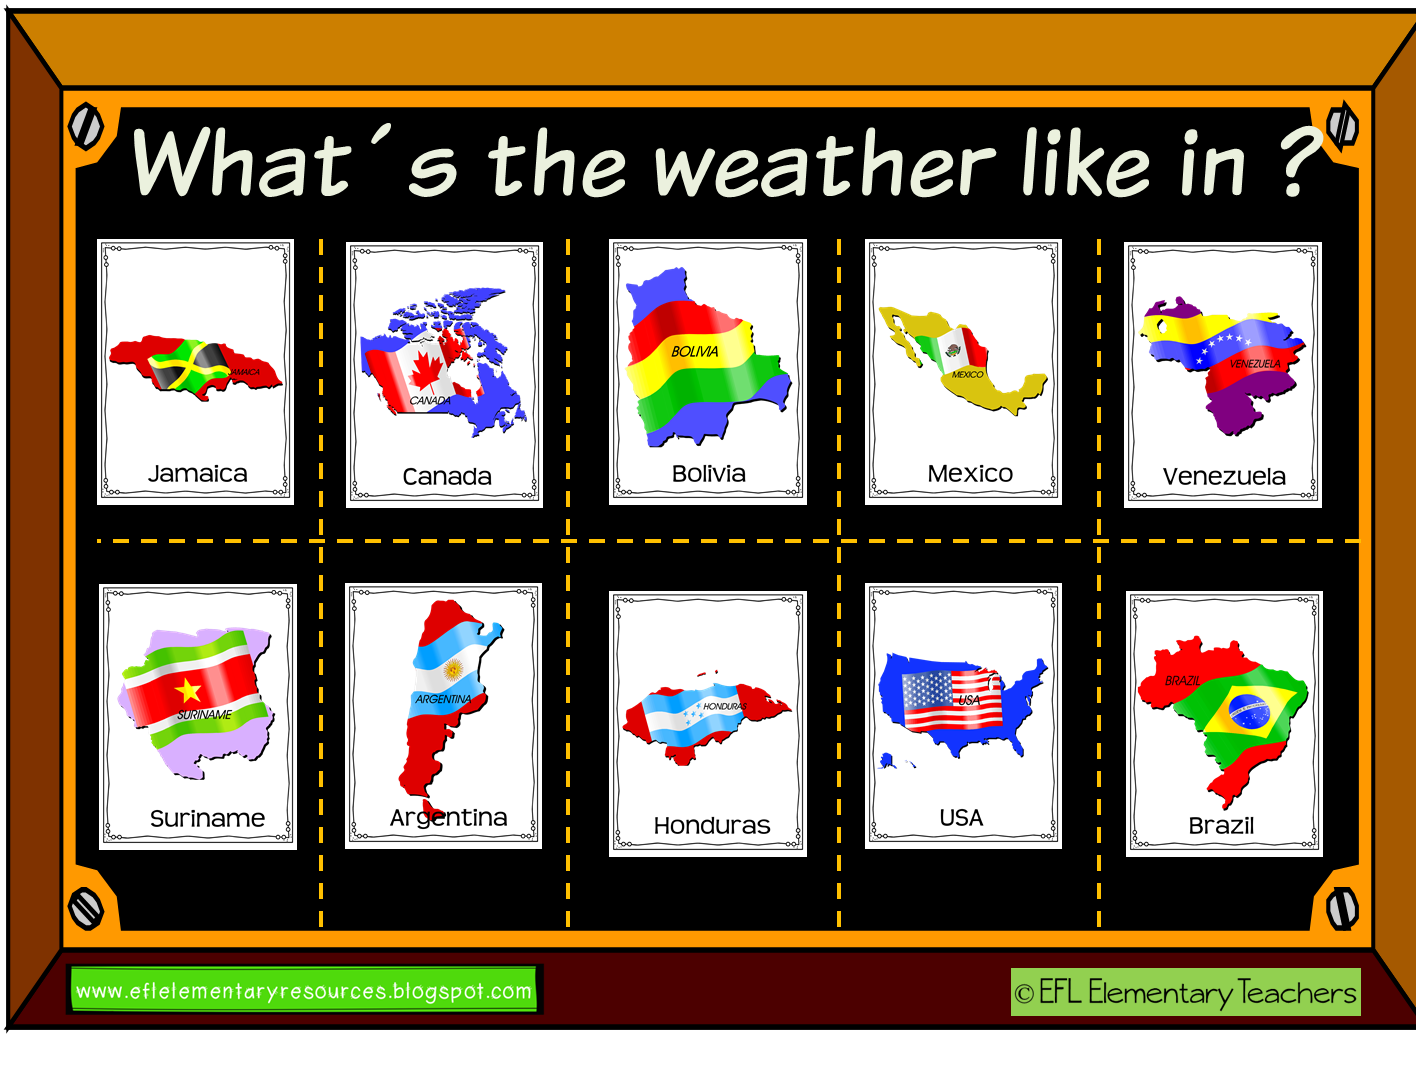 The weather in the World. Weather in different Countries. Weather around the World. Weather Forecast around the World. Country differences